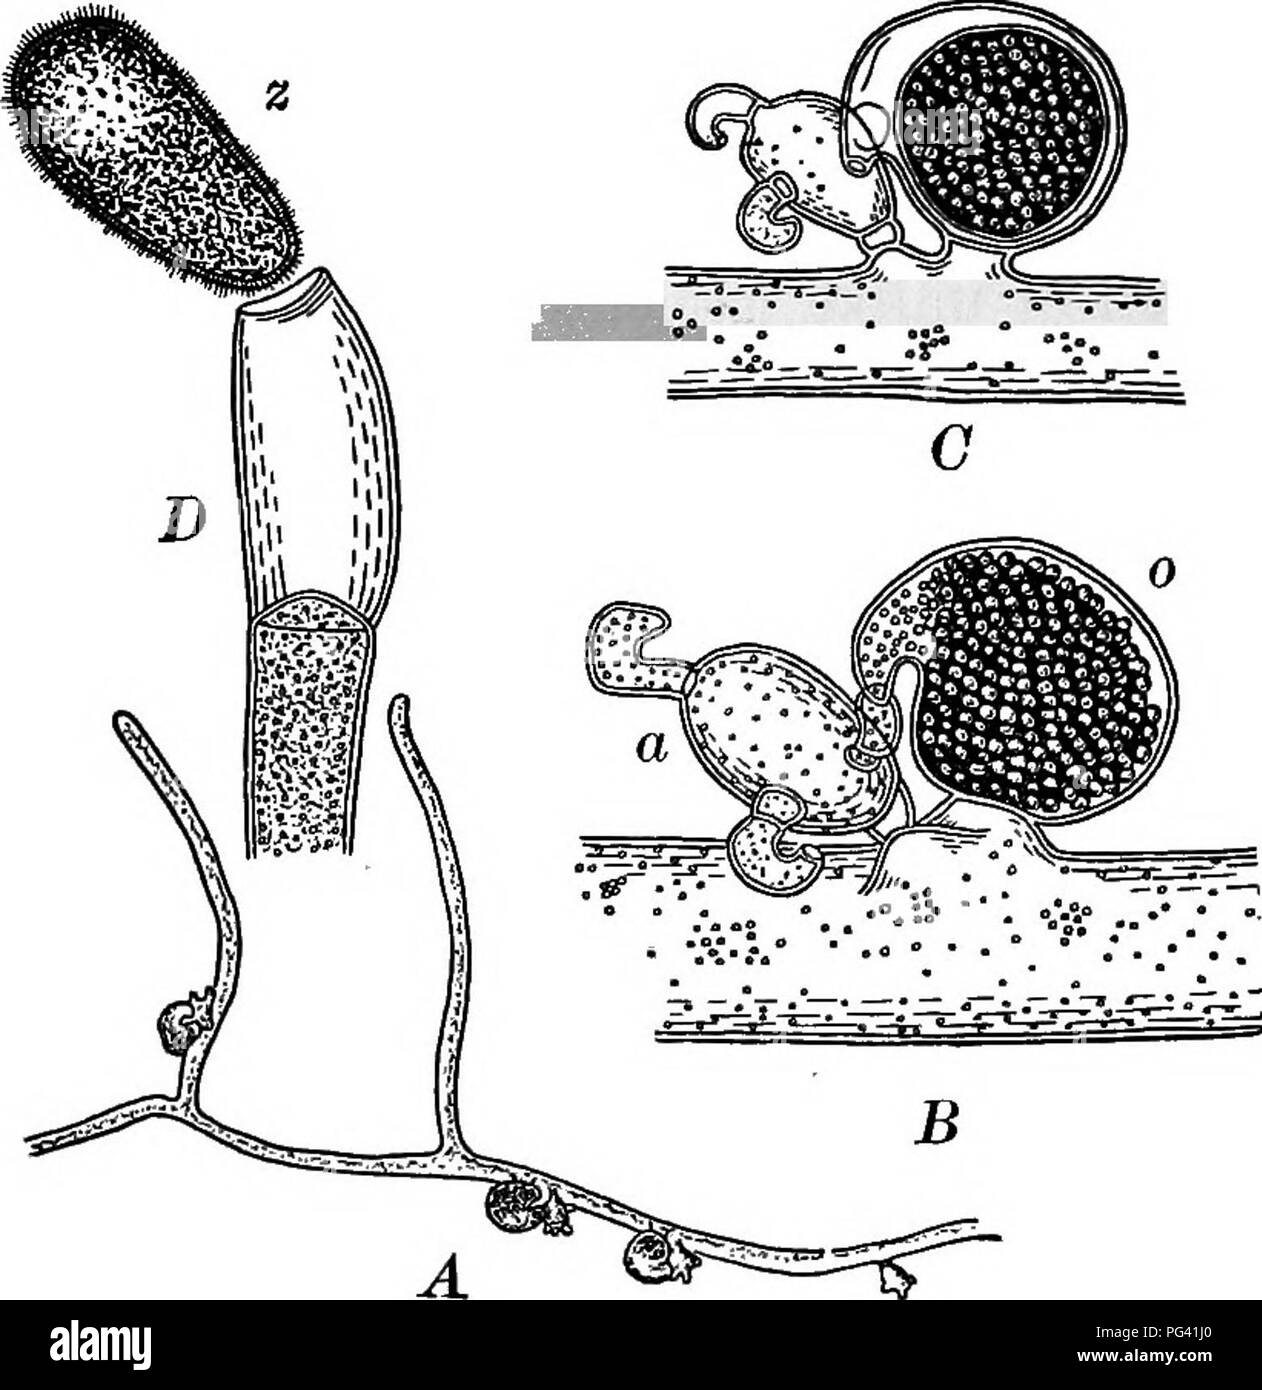 . Essentials of botany. Botany; Botany. 226 ESSENTIALS OF BOTANY felt-like masses which it forms. It must not be confused with moss protonema (Fig. 199) which also grows on damp earth. The protonema has many cross-partitions in the filaments (often oblique in position) and lacks other. Fig. 157. Yaucheria synandra. A, a filament with archegonia and antheridia (considerably magni- fied); 5, part of same much more highly magnified; o, oogonium; a, antheridium; C, a later stage oi B; D, end of a filament with a zoospore, z, escaping (highly magnified). characteristics shown in Fig. 157, A. It wil Stock Photo